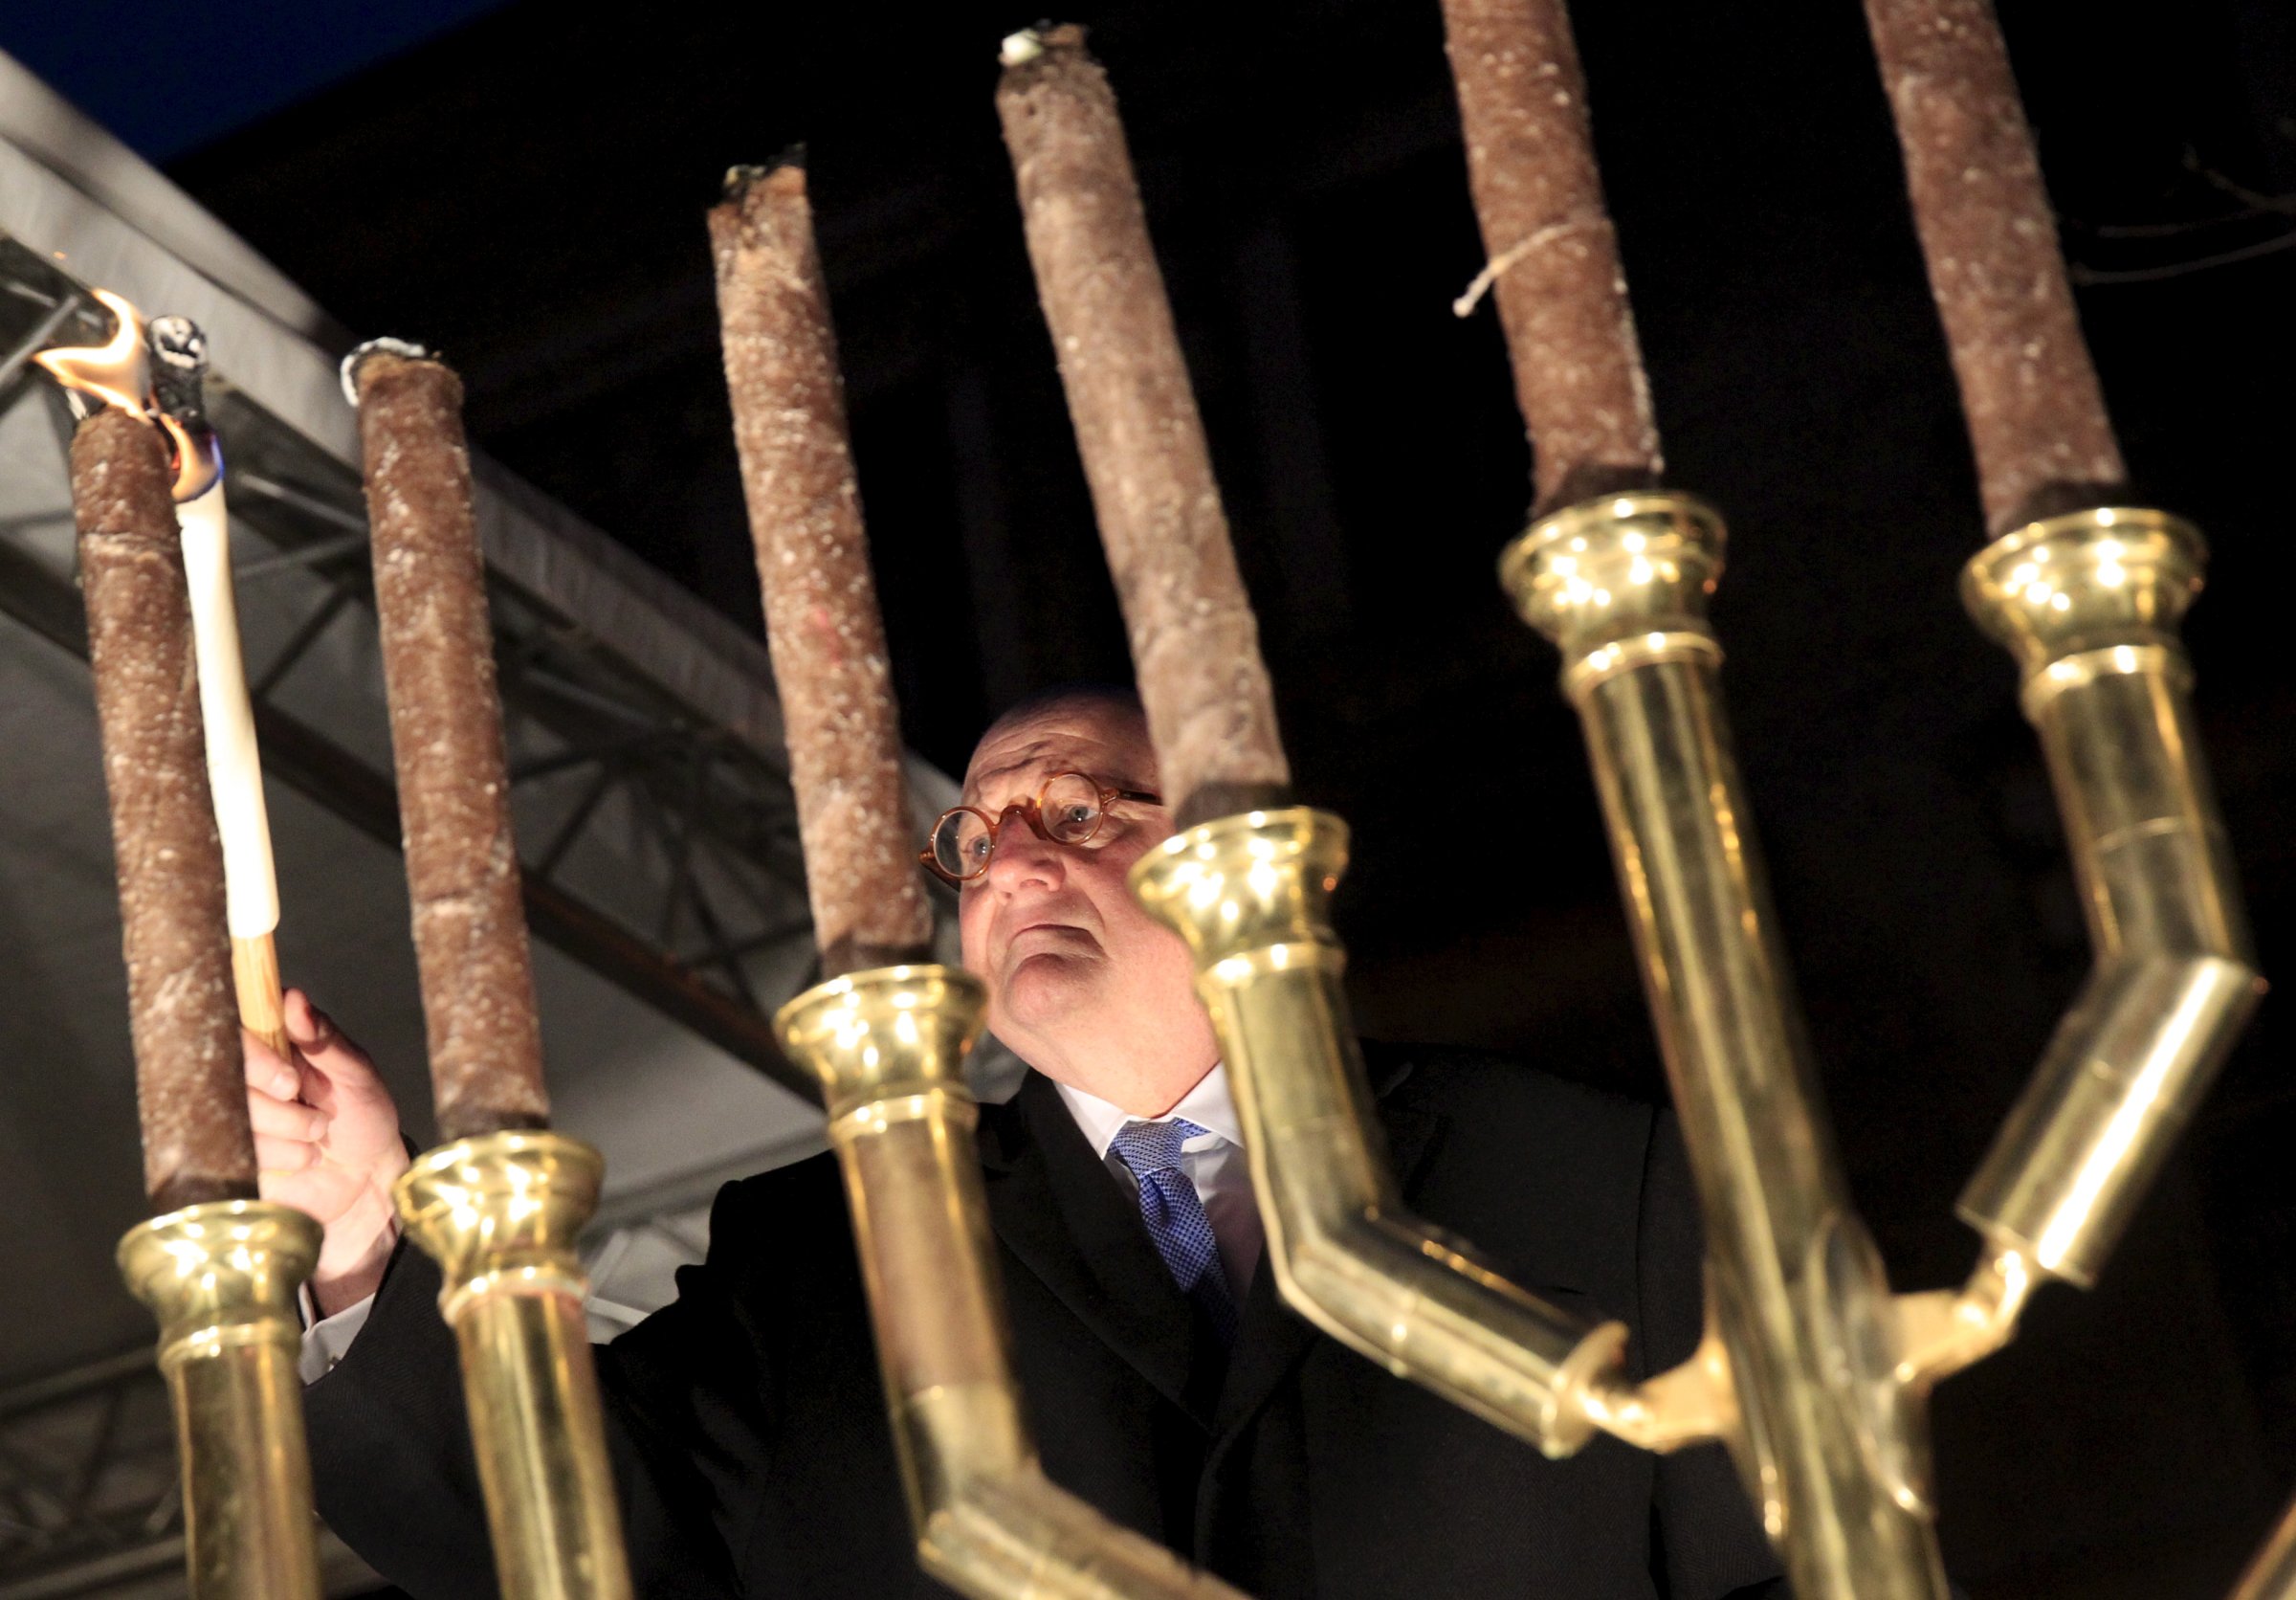 Forman, U.S. Special Envoy of the Office to Monitor and Combat Anti-Semitism, lights a menorah during a protest organised by a Jewish group against a planned statue of Balint Homan in Szekesfehervar